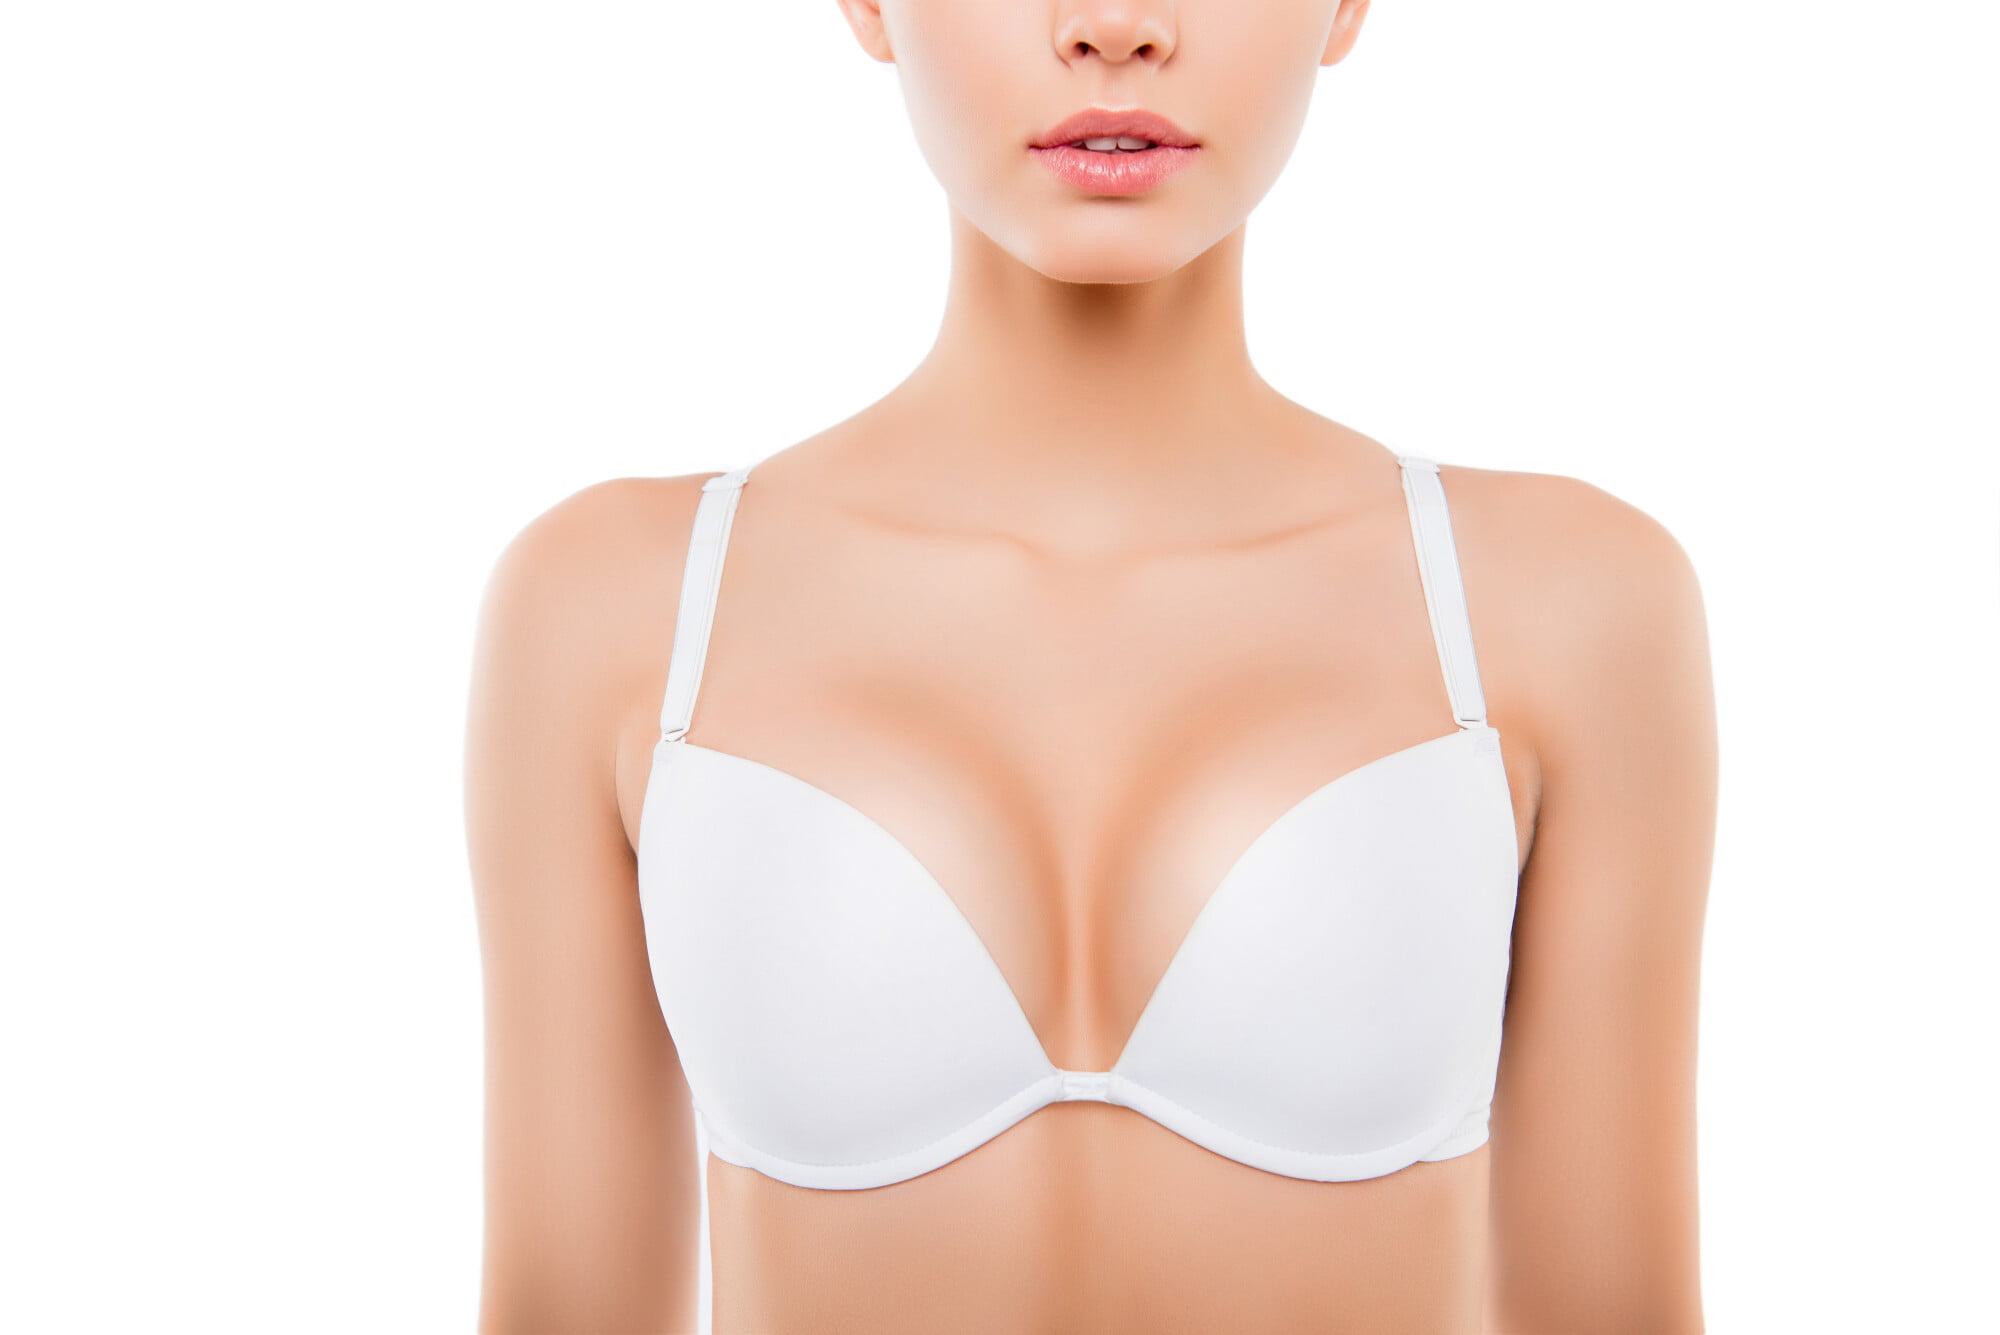 No two pairs of breasts are the same. Whether you leave them natural or opt for augmentation, learn about the different shapes of breasts.